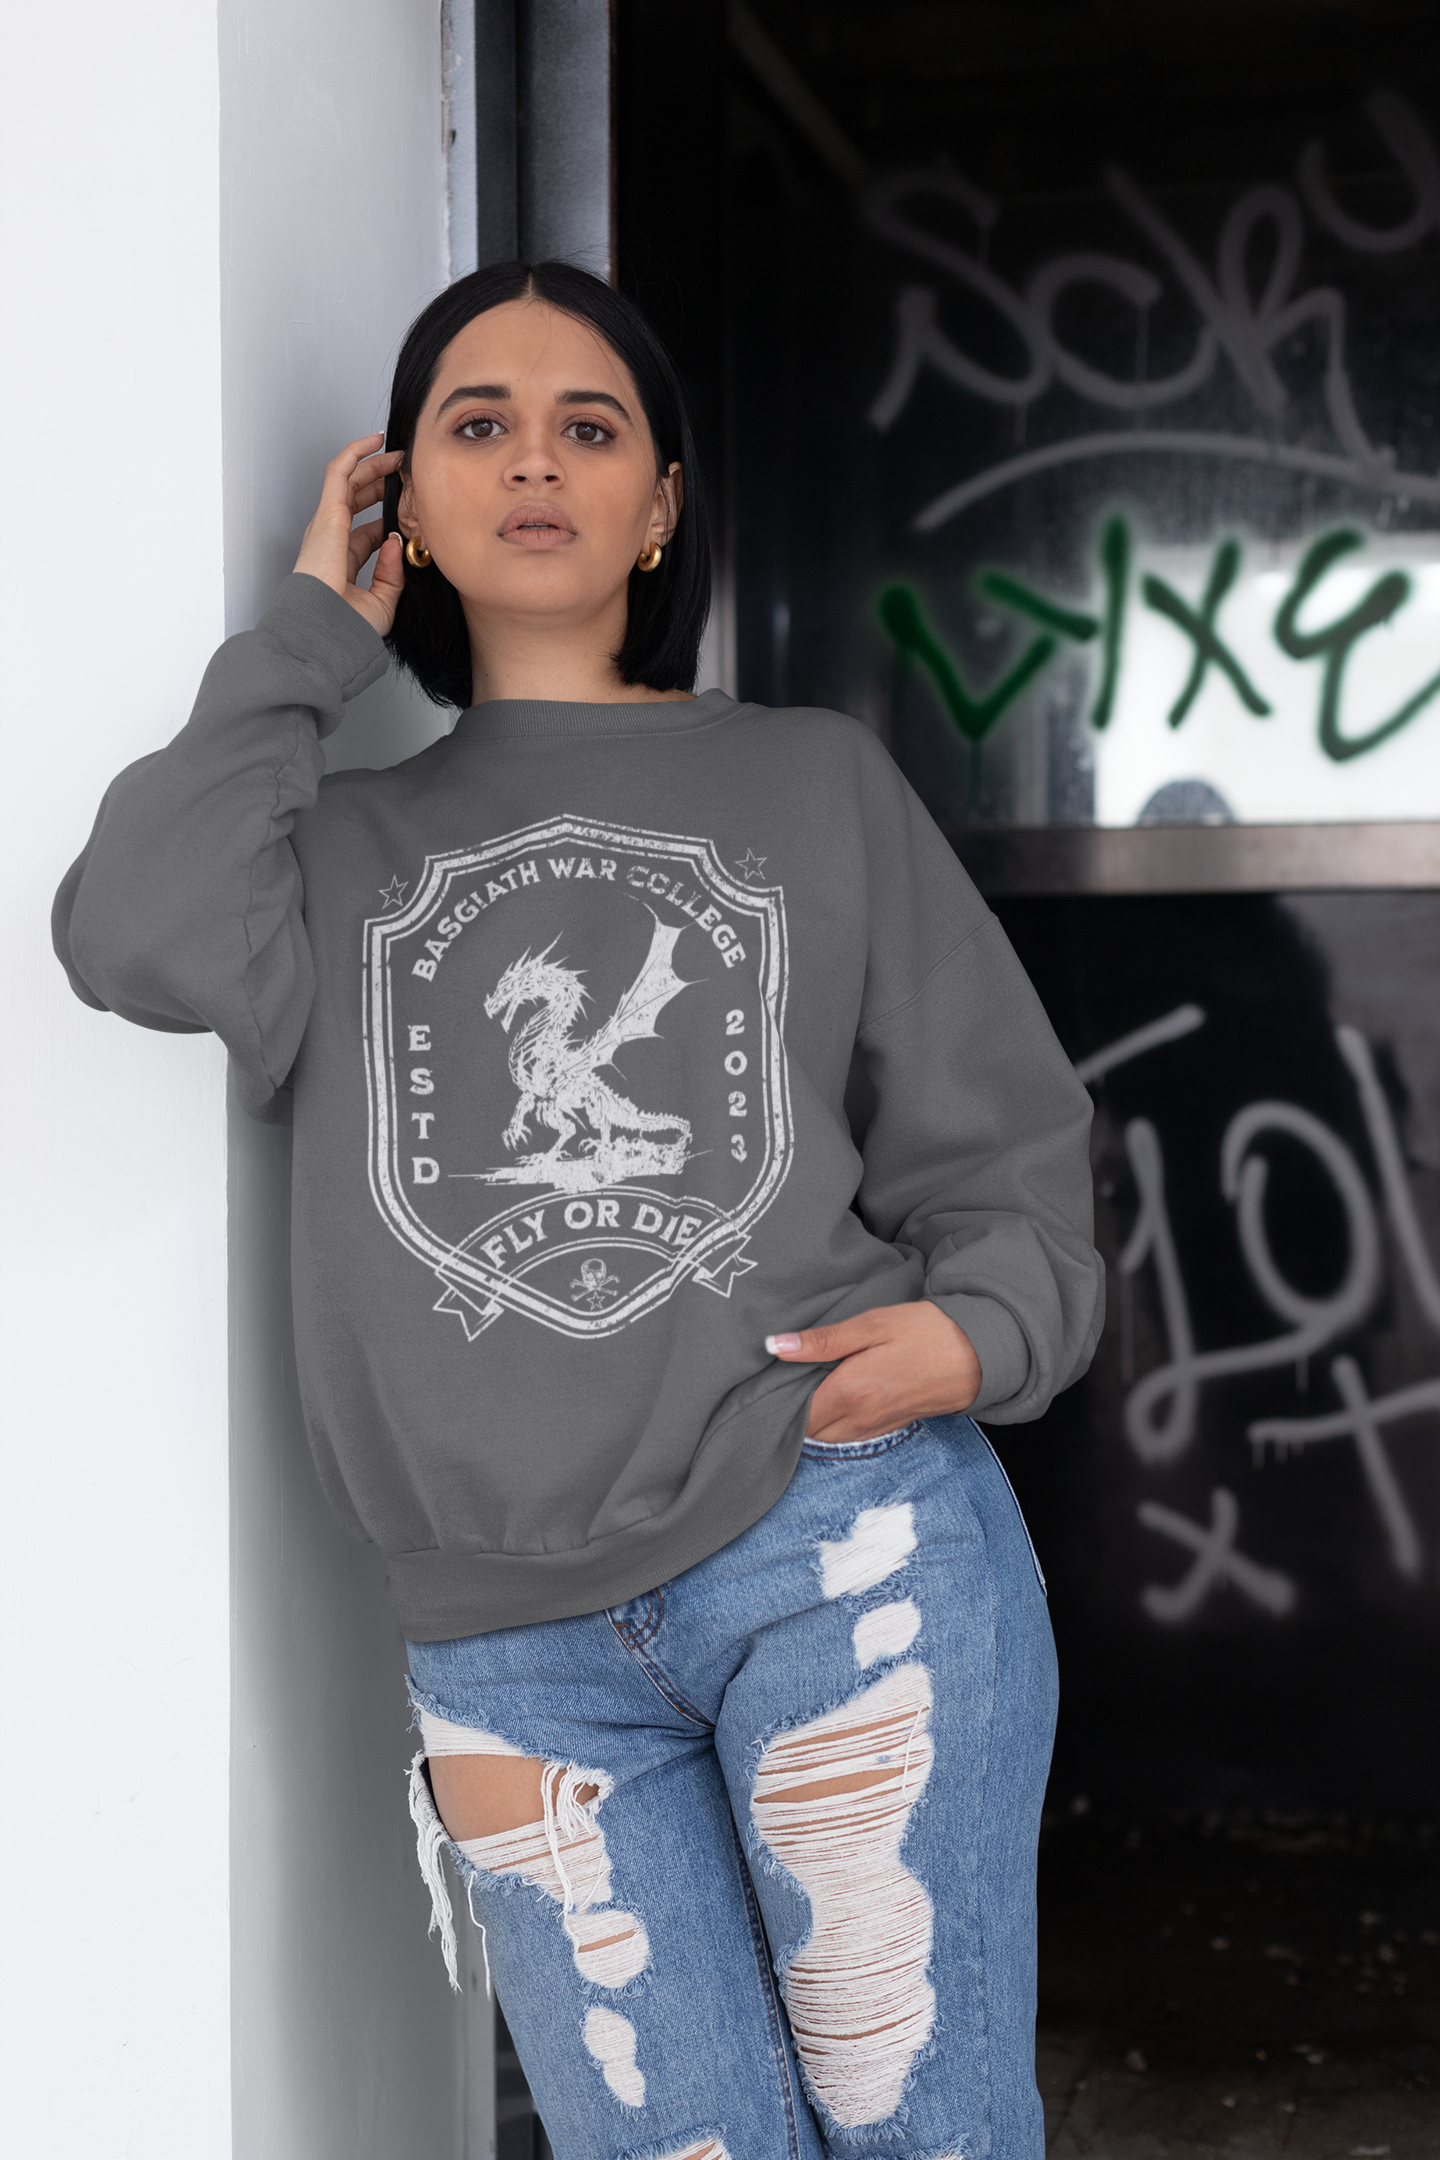 Basgiath War College Sweatshirt - Officially Licensed Fourth Wing by Rebecca Yarros Merchandise